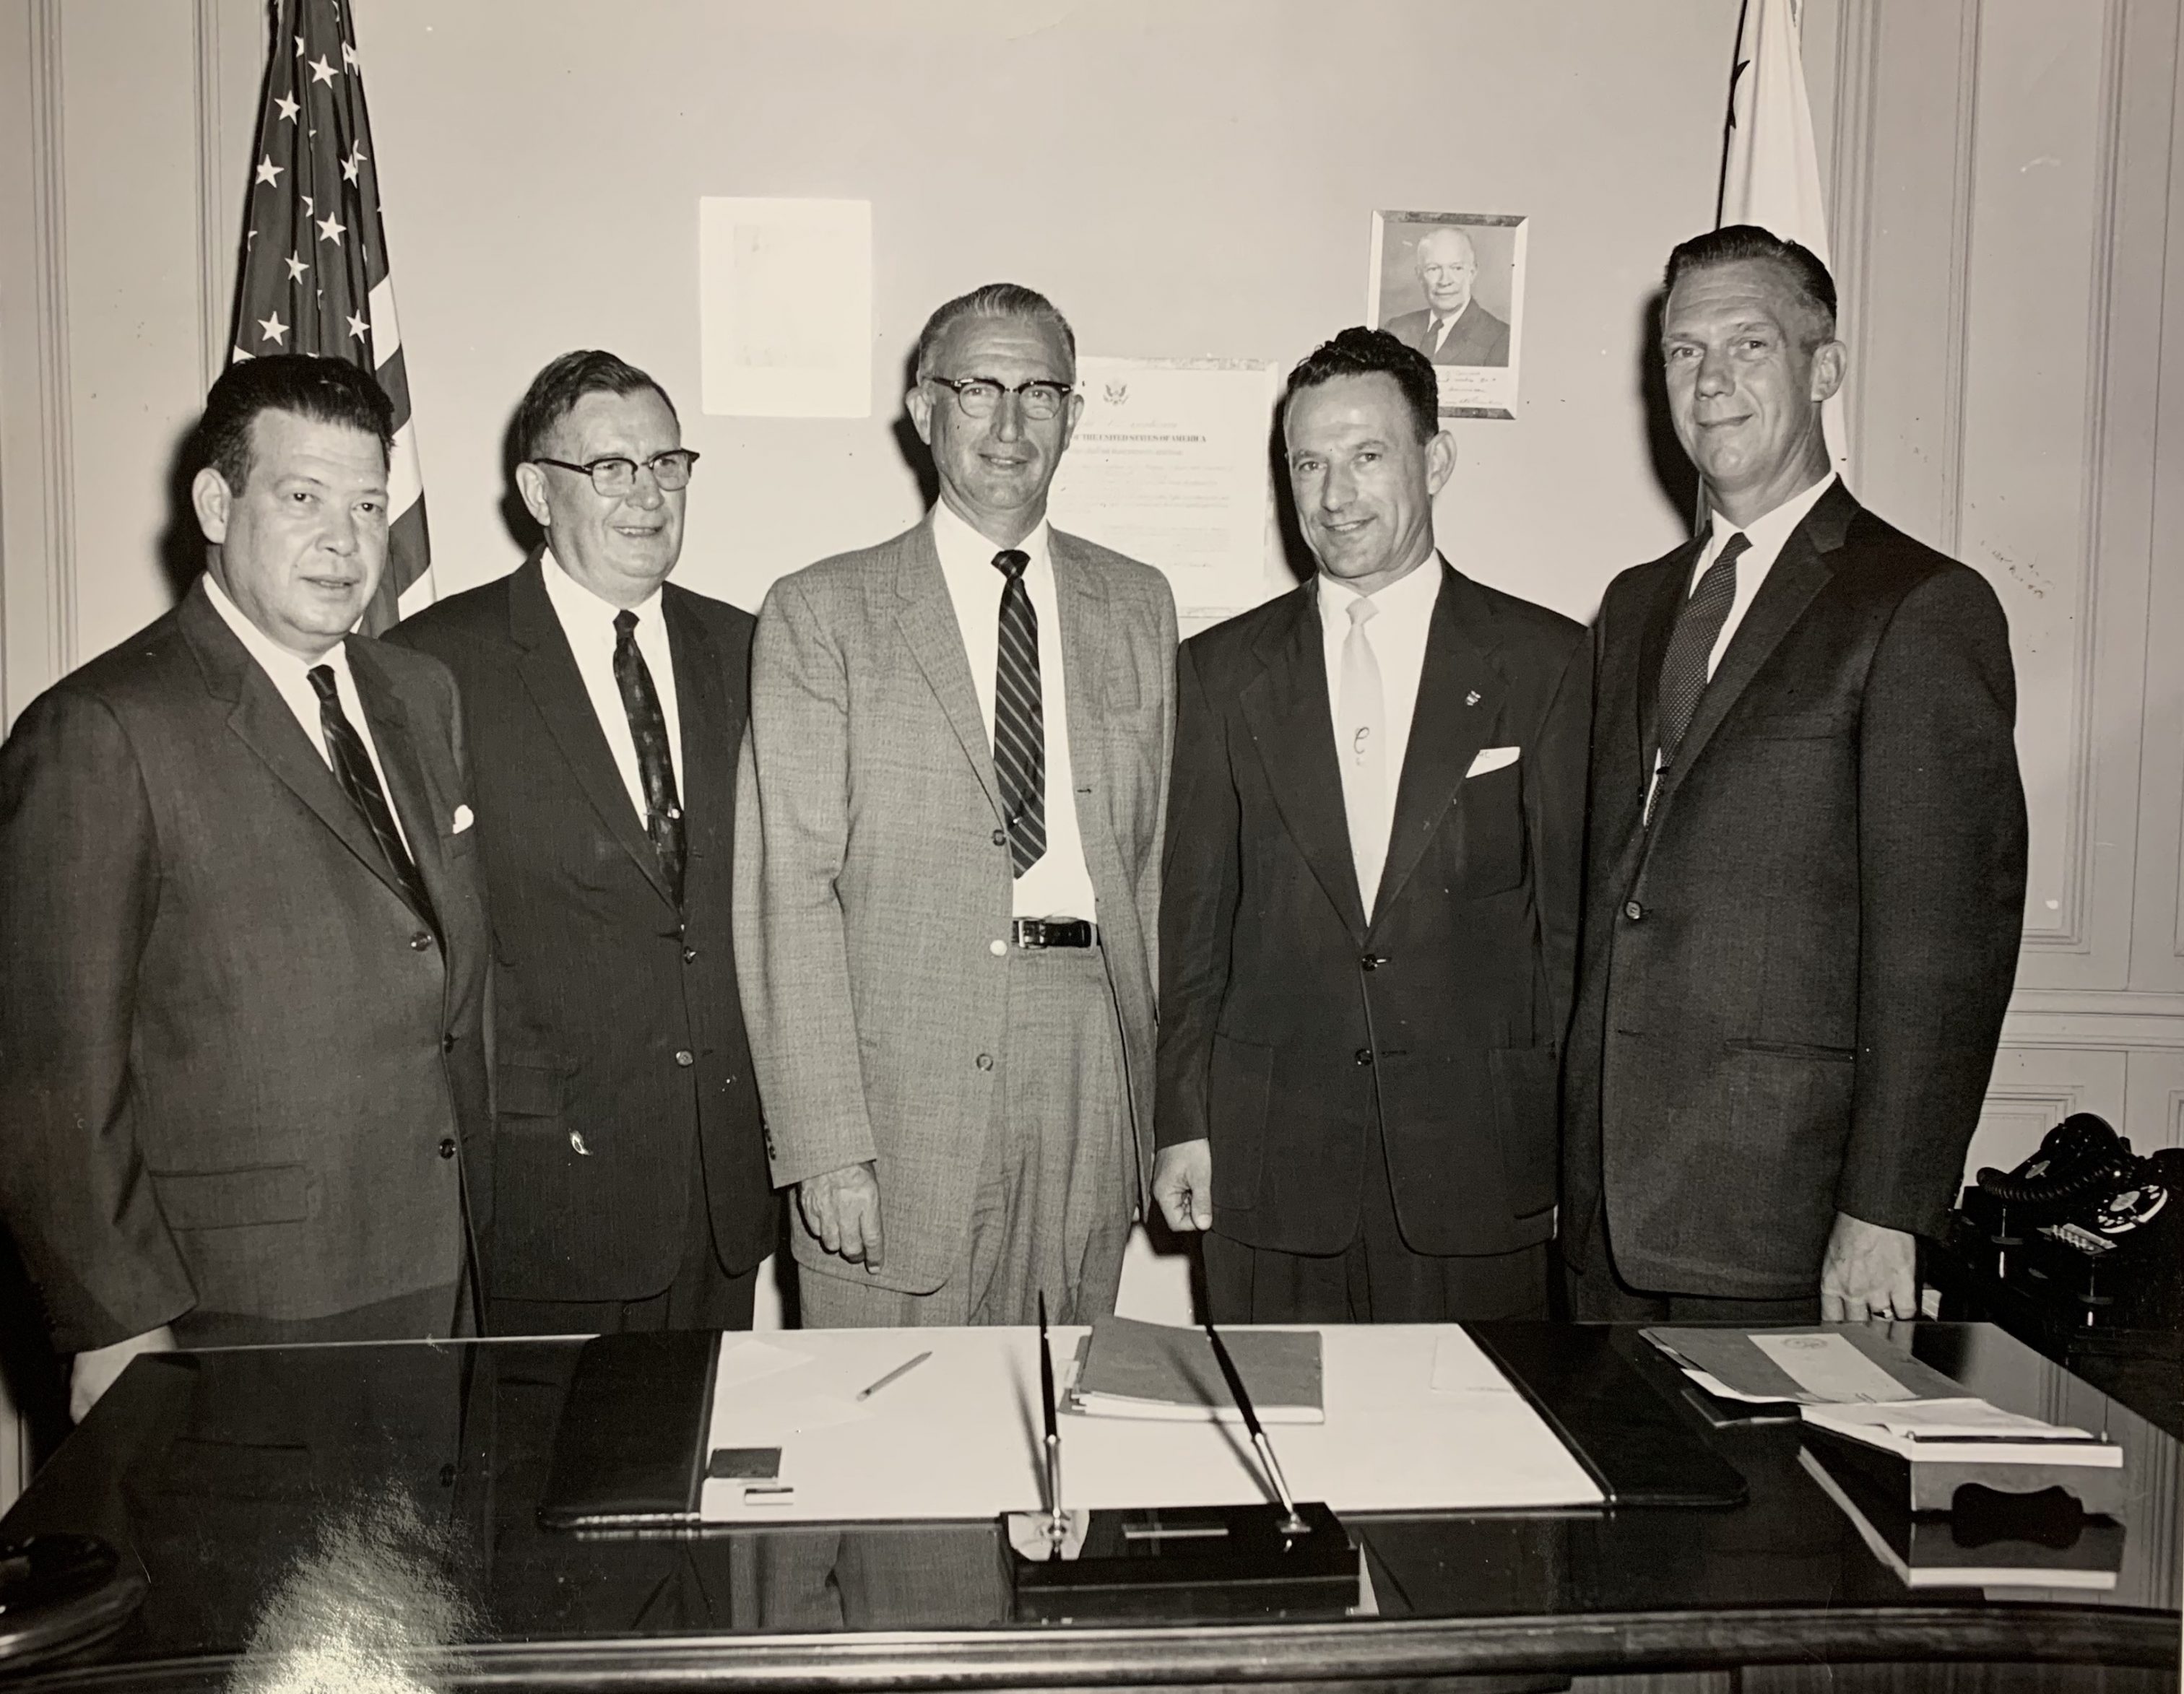 Jacob Friedrick (second from left) is pictured with his fellow members of the Berlin Trade Fair trade union team and Under Secretary of Labor James T. O'Connell (center) prior to their trip to Berlin in 1958.